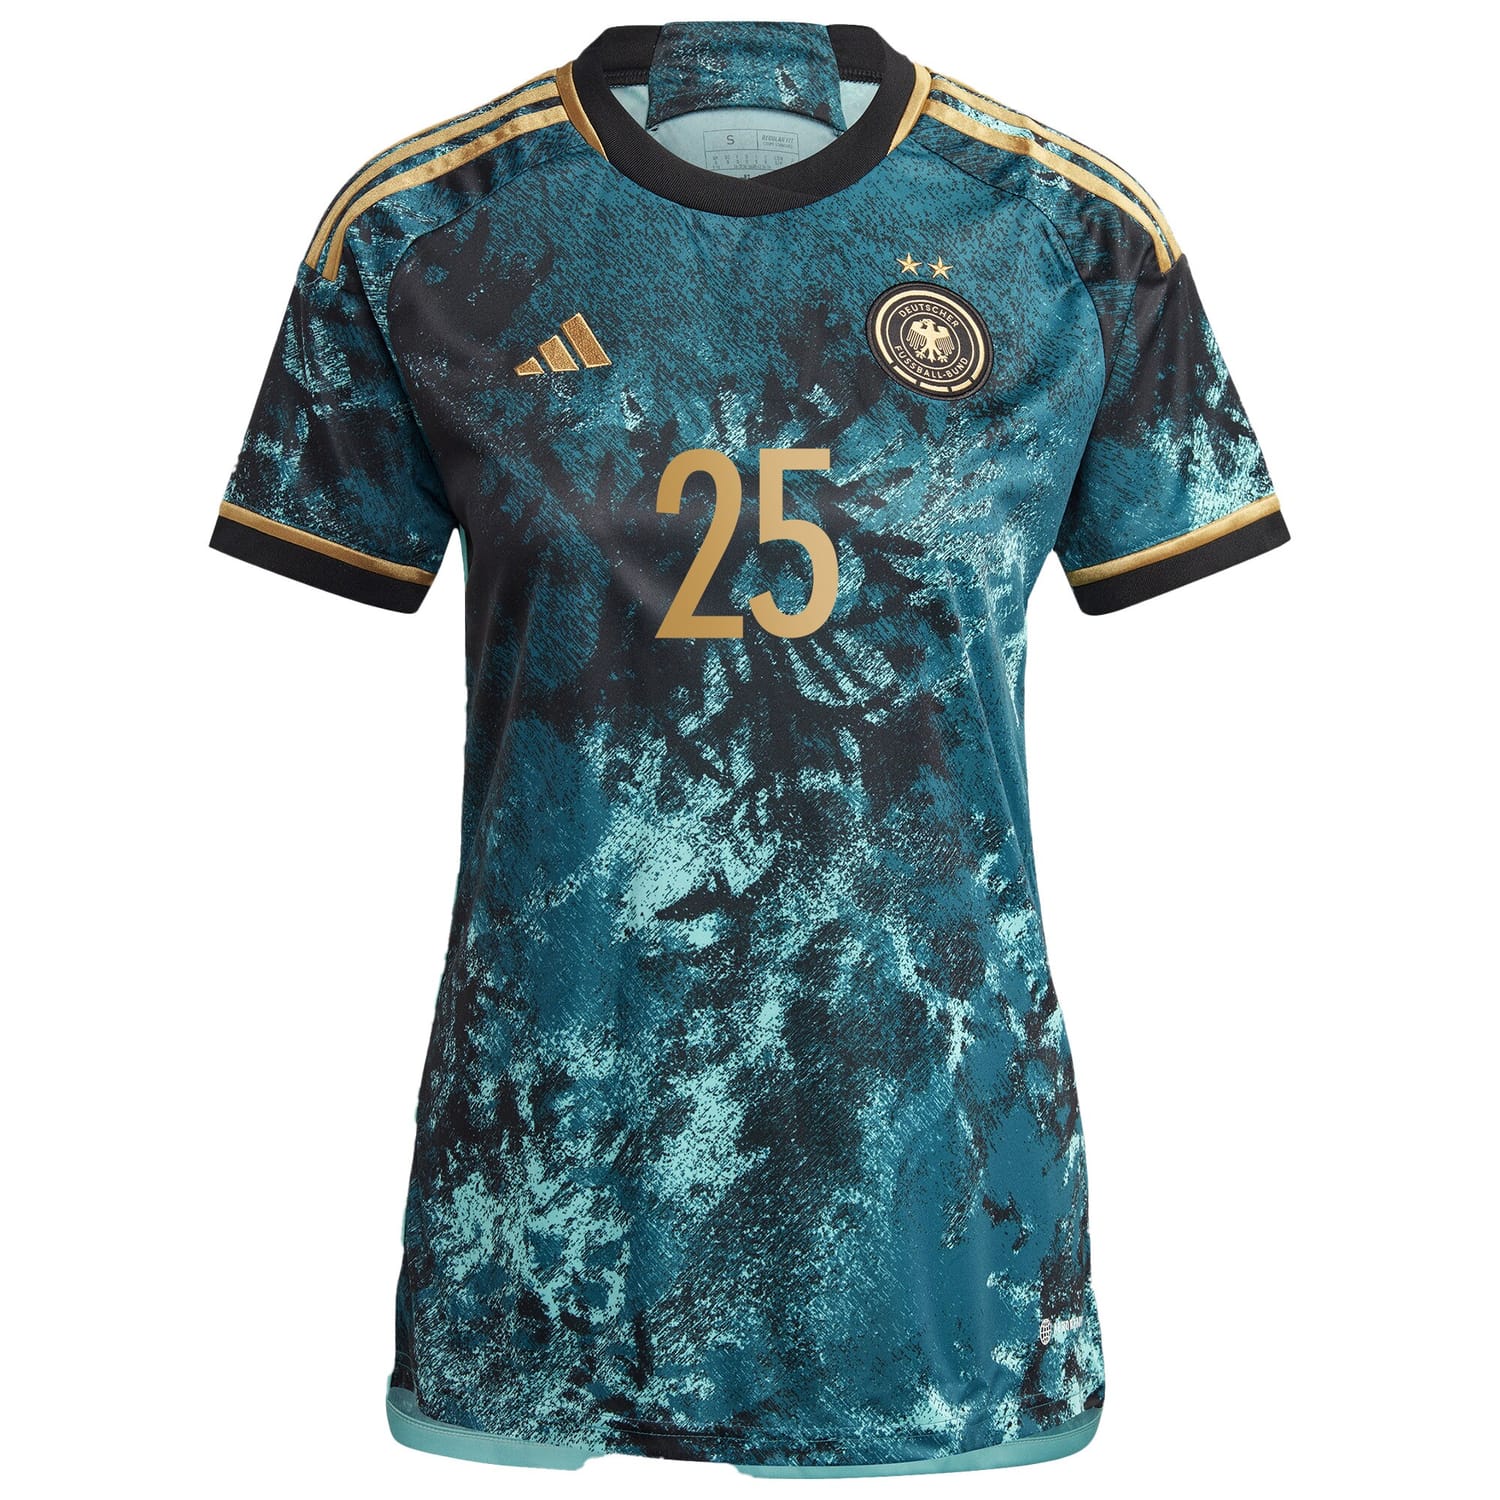 Germany National Team Away Jersey Shirt 2023 player Nicole Anyomi 25 printing for Women